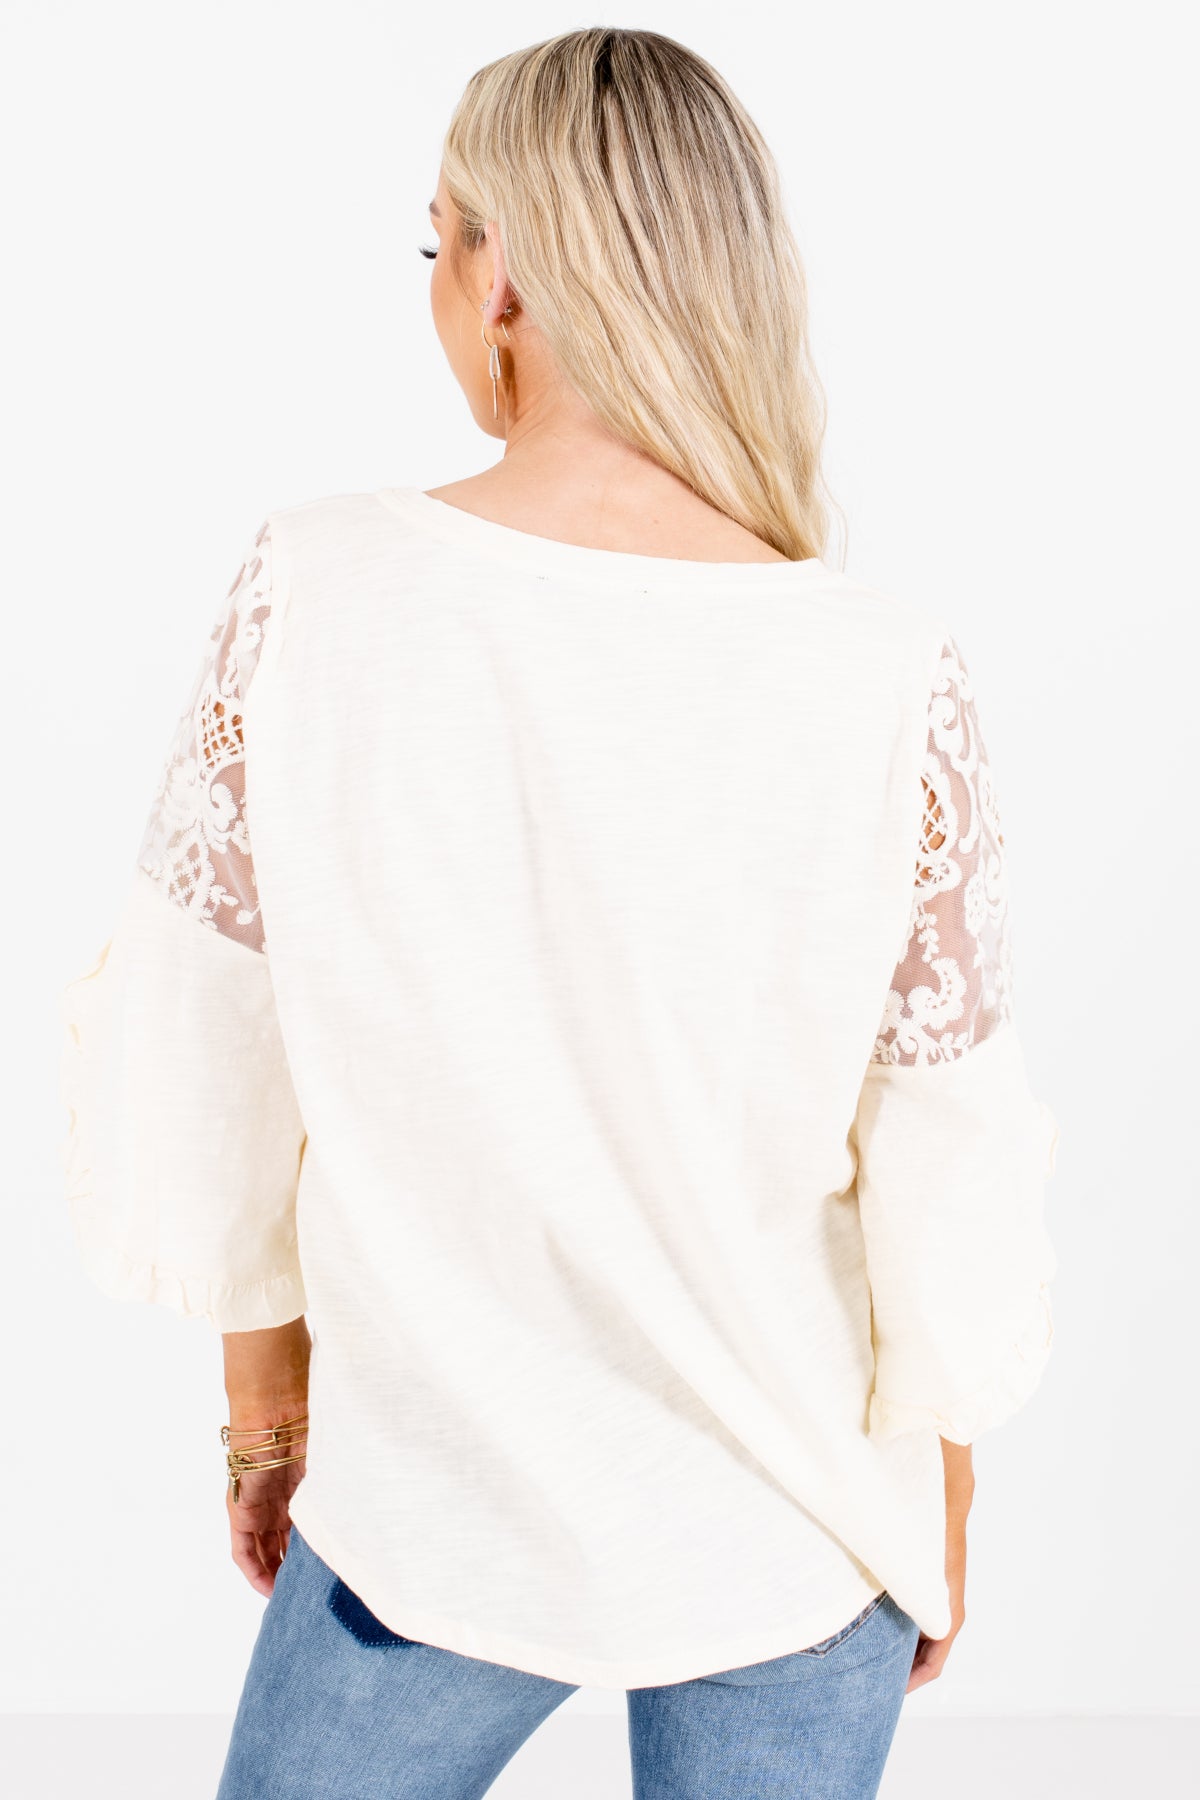 Women's Cream Bell Sleeve Style Boutique Blouse